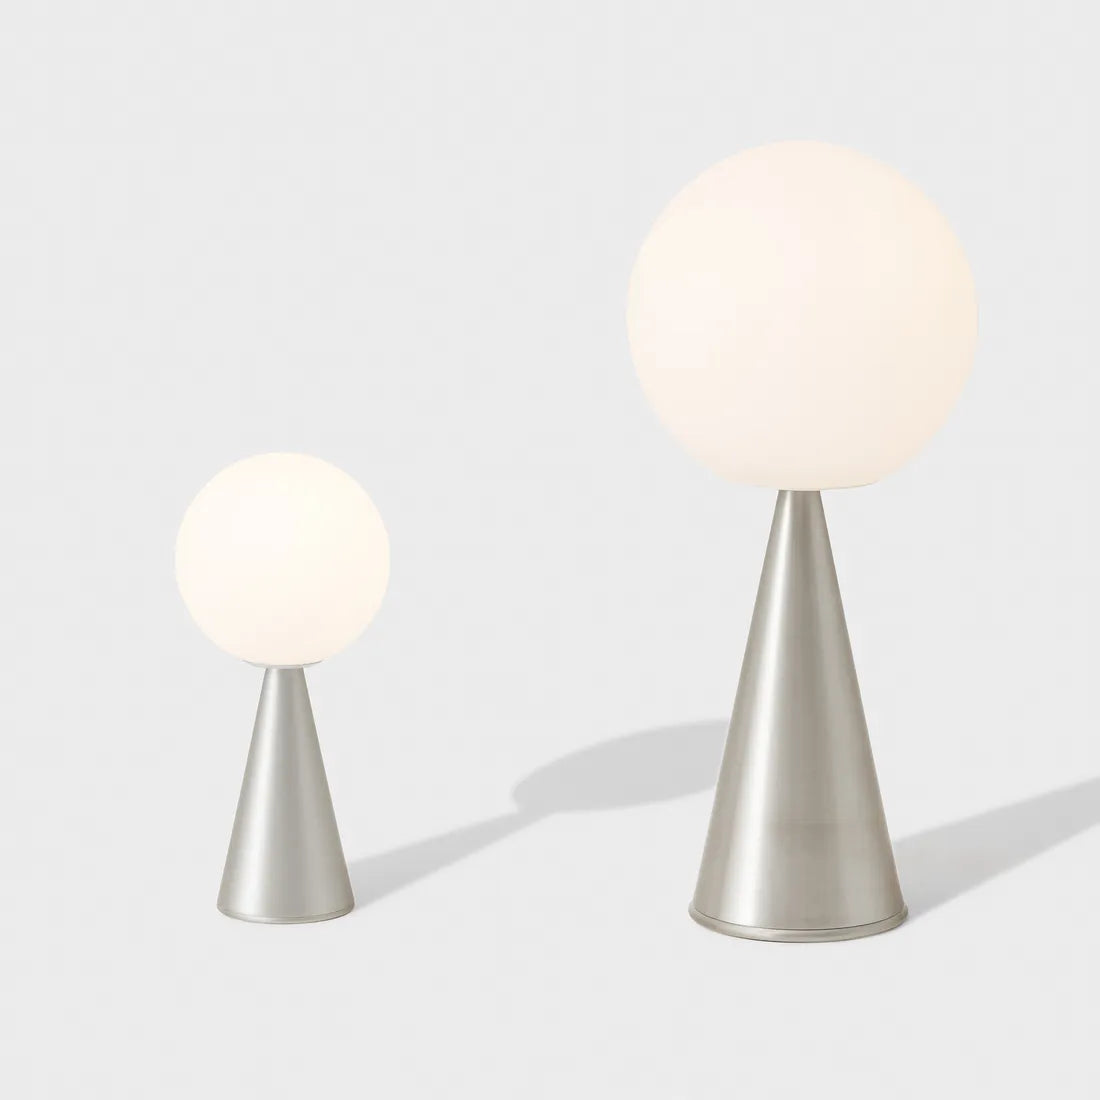 designer table lamps online, table lamps india, new mini lamps for dining table nickel